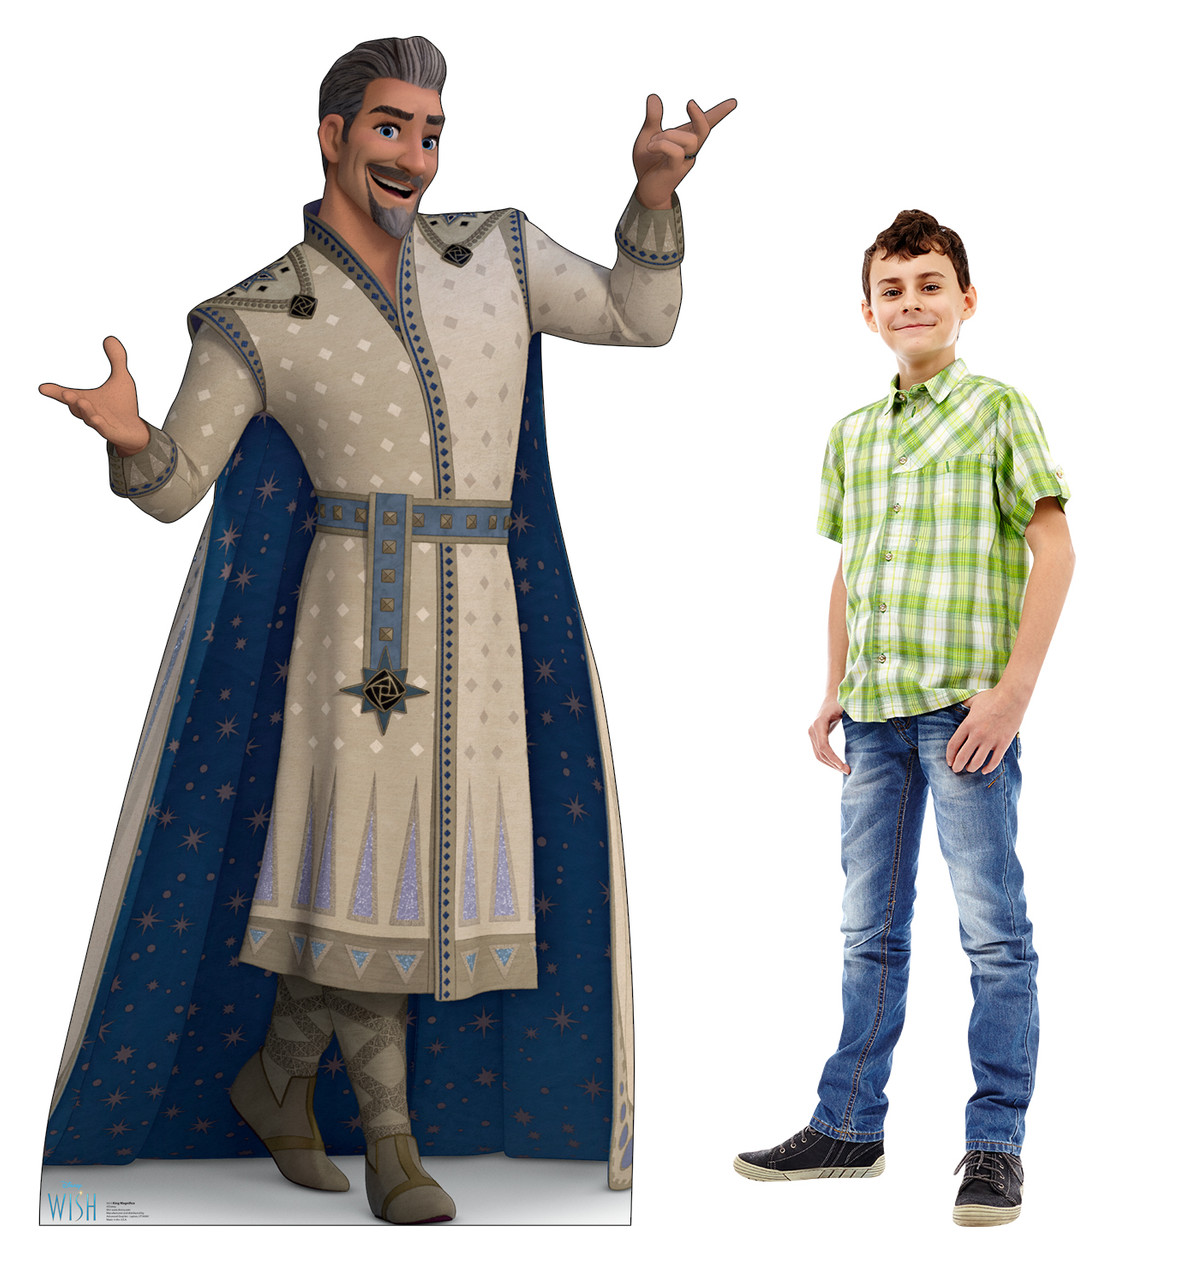 Life-size cardboard standee of King Magnifico with model.